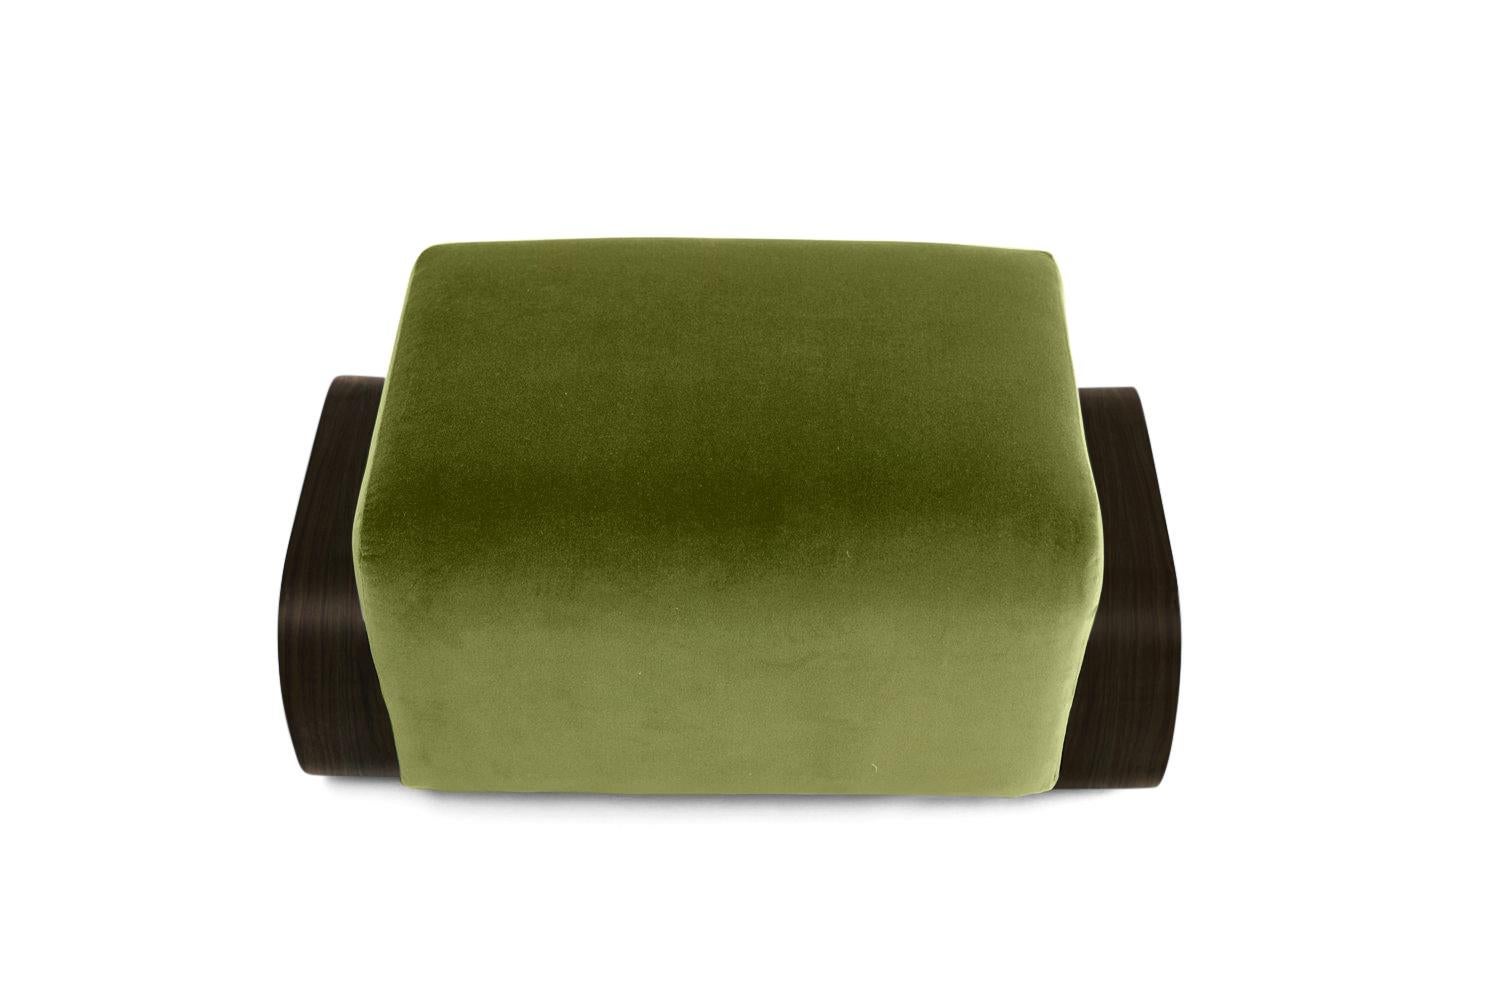 The Cayenne lounge chair and ottoman are a deft homage to midcentury design. Designer Marie Burgos has taken the clean lines that defined seating designs of that era and given them a luxurious new simplicity. The plush upholstery — available in a